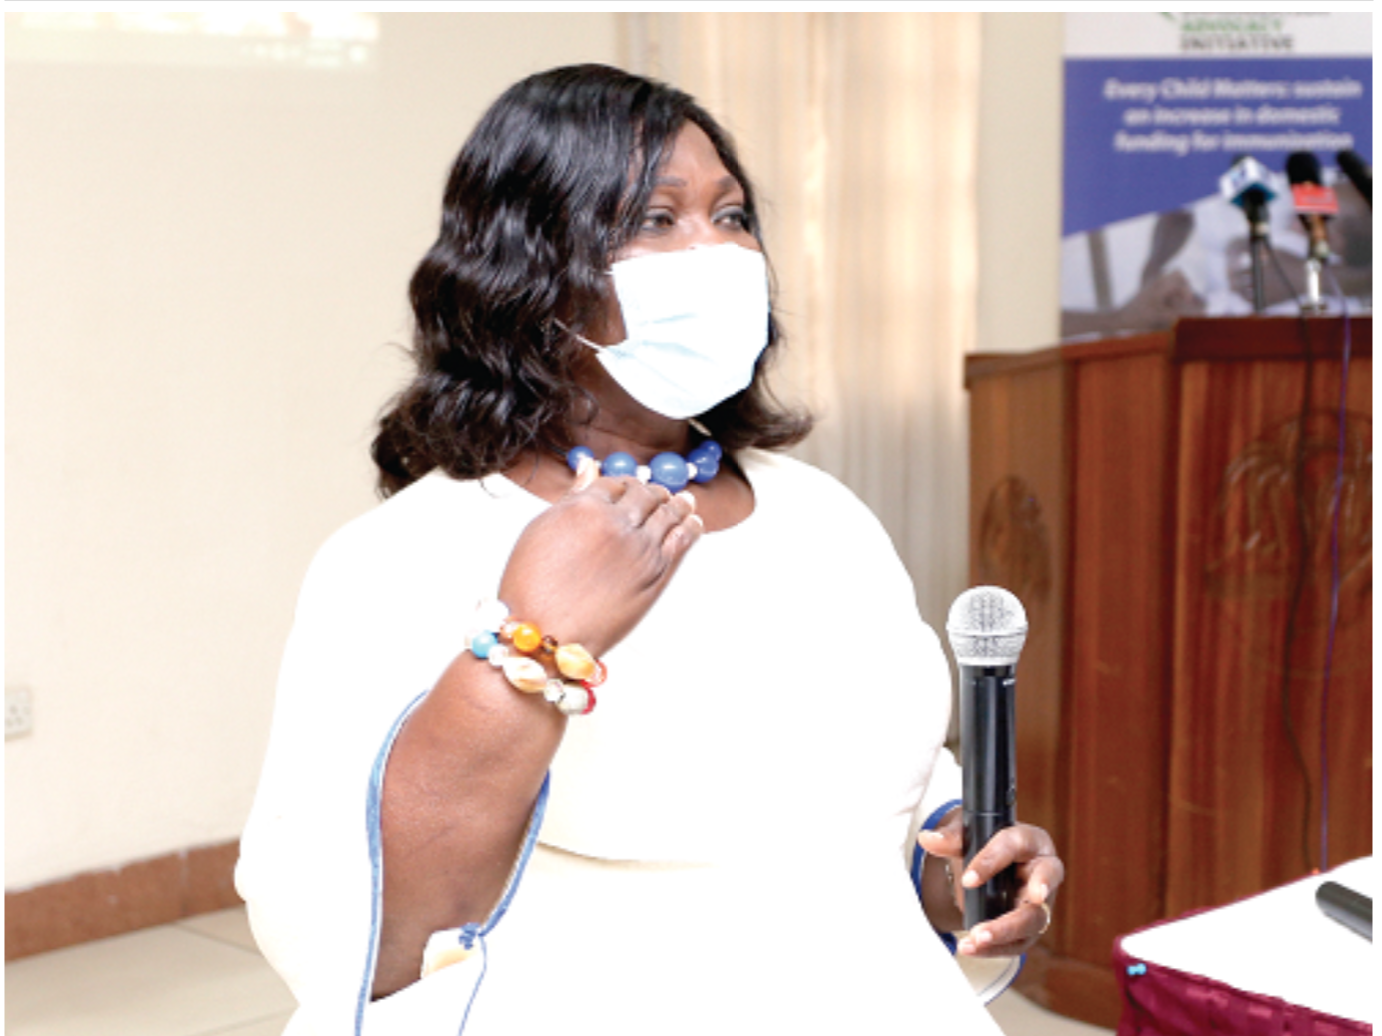 Need for increase in domestic funding towards the health sector in Ghana